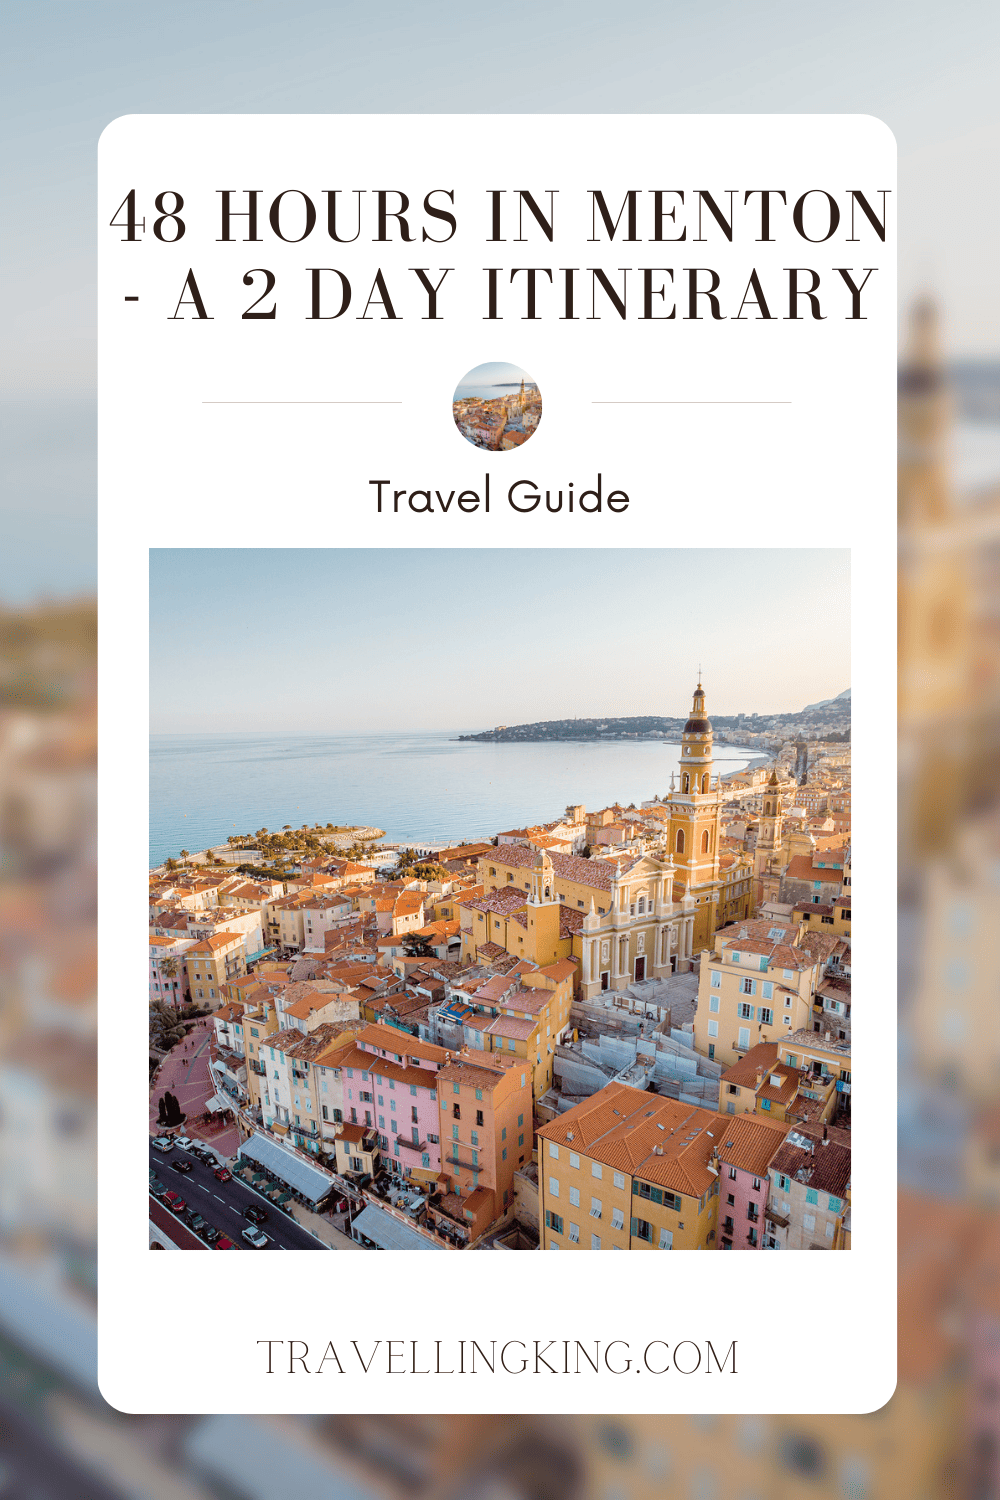 48 hours in Menton - A 2 day Itinerary